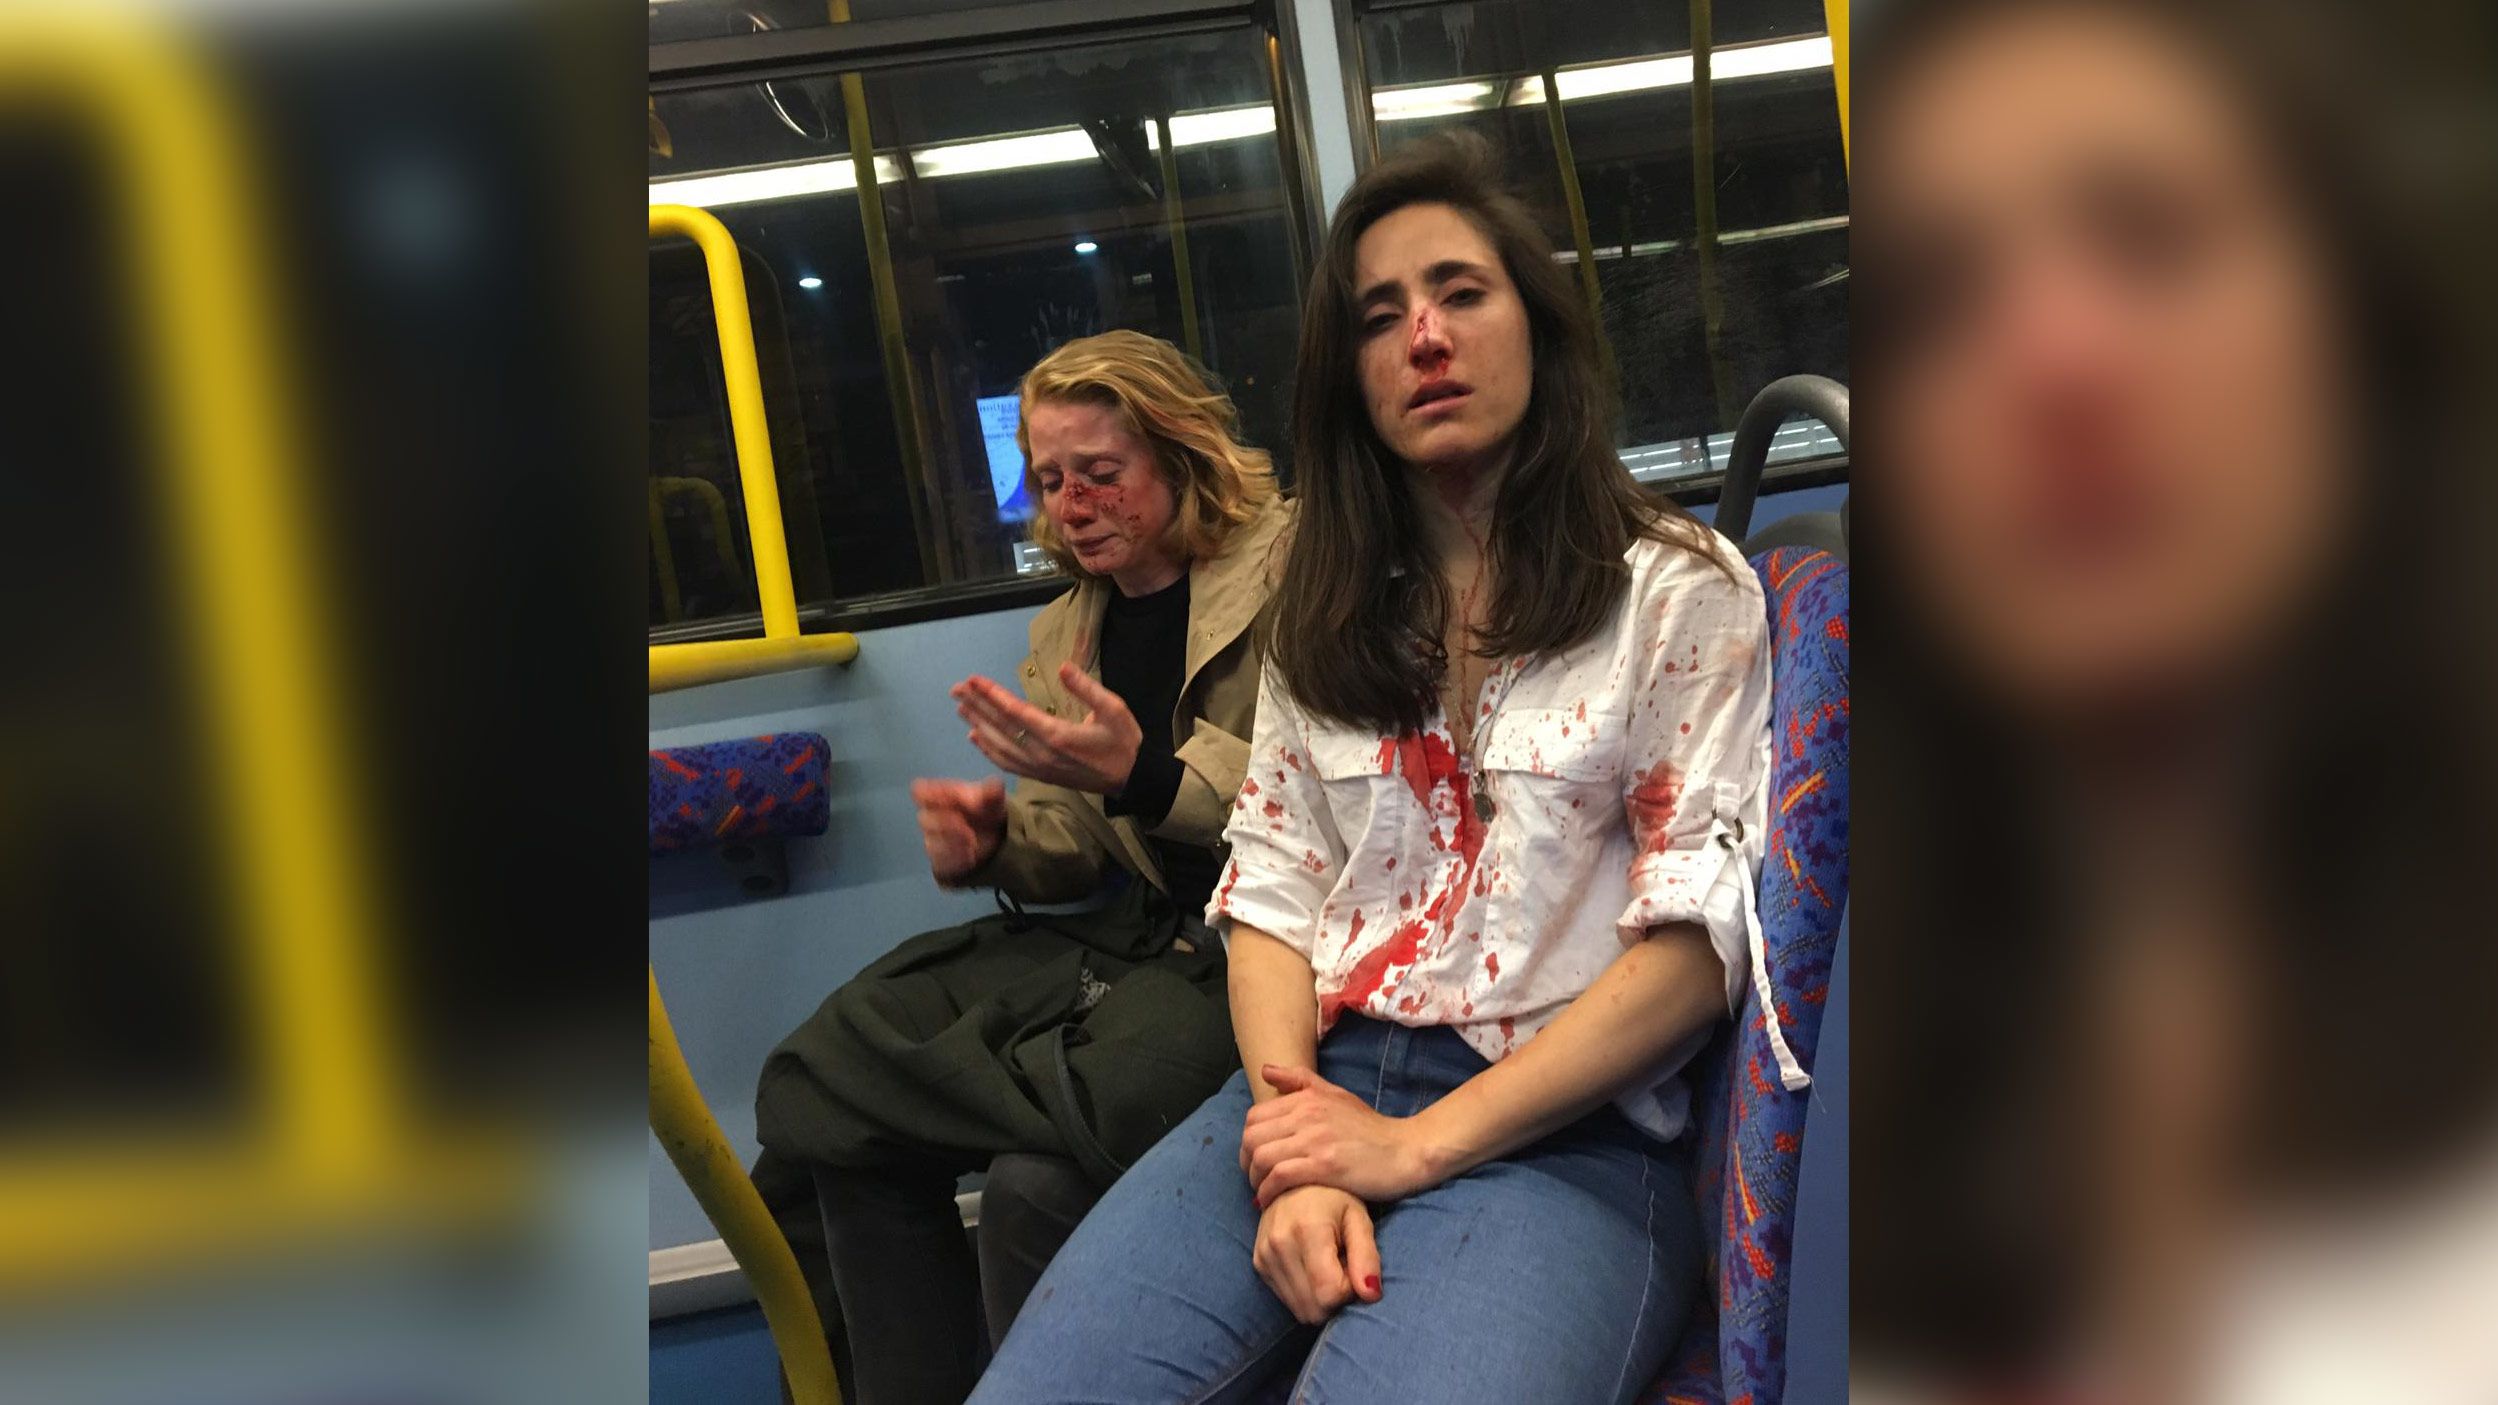 Nasty Drunk Lesbians - London bus attack: Lesbian couple viciously beaten in homophobic incident |  CNN